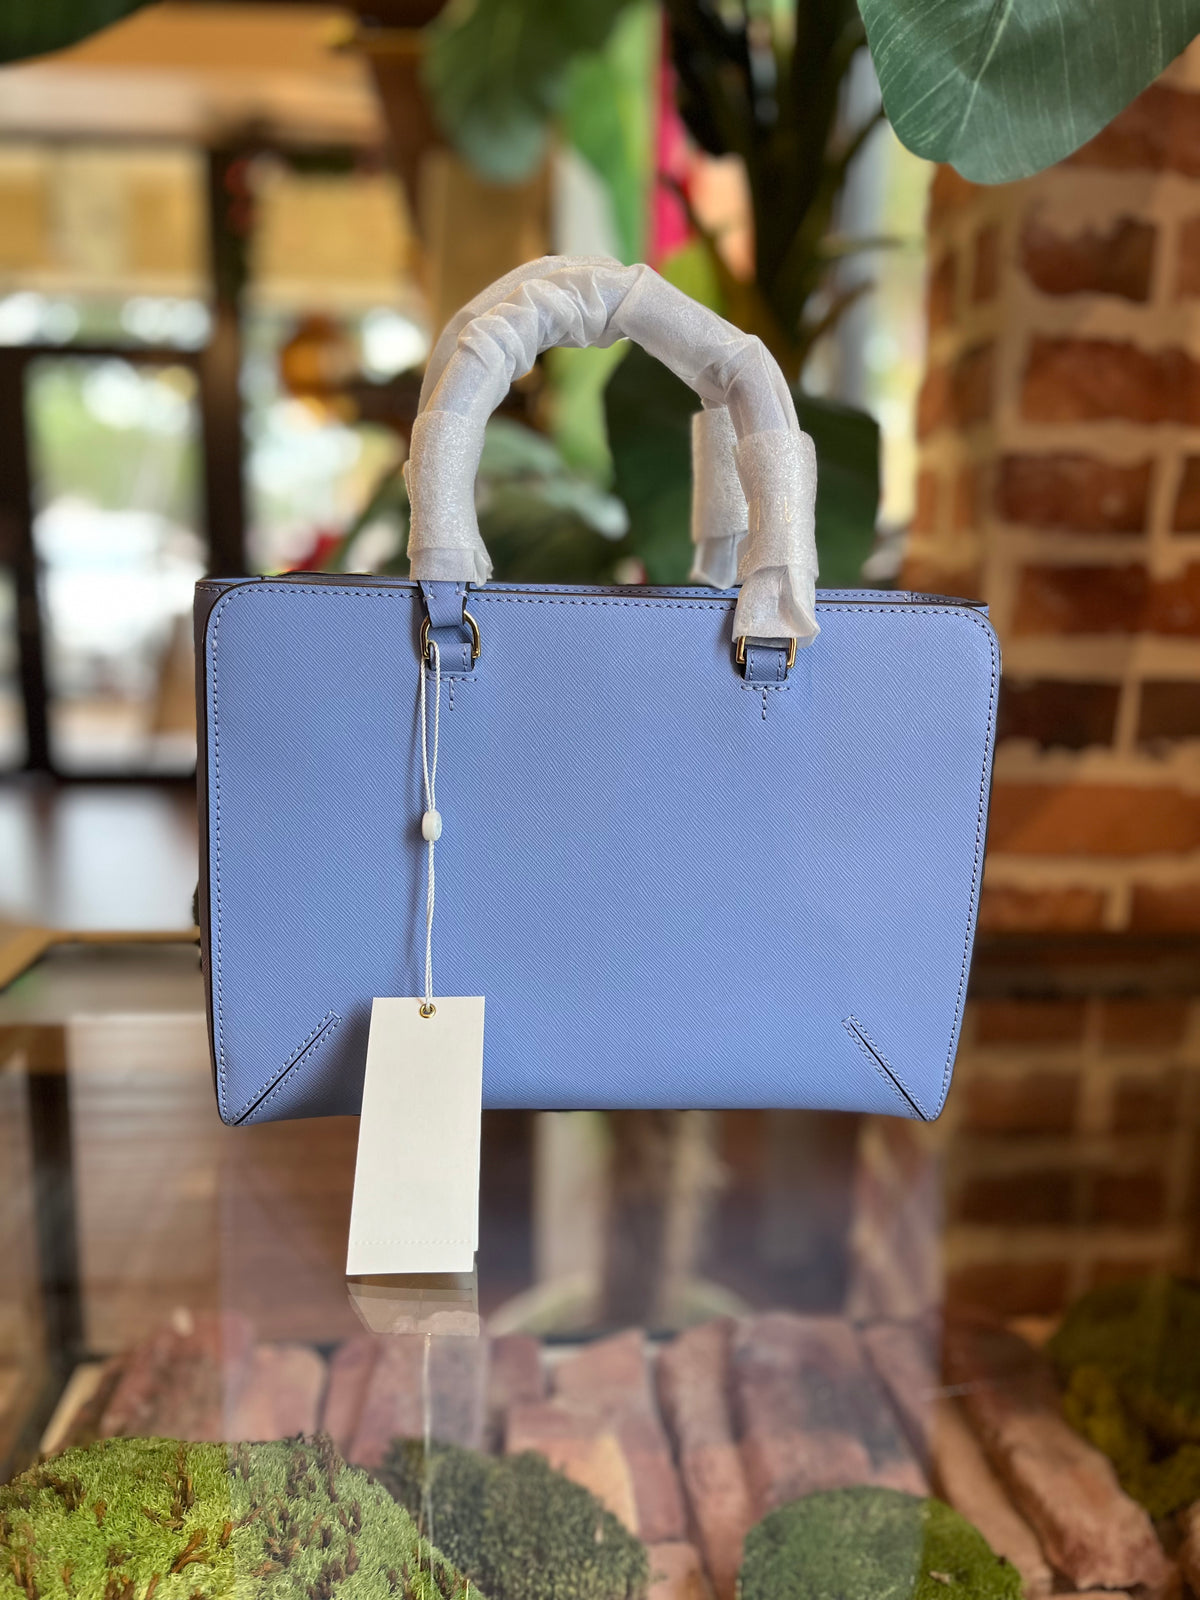 Tory Burch Perwinkle Emerson Double Pocket Tote